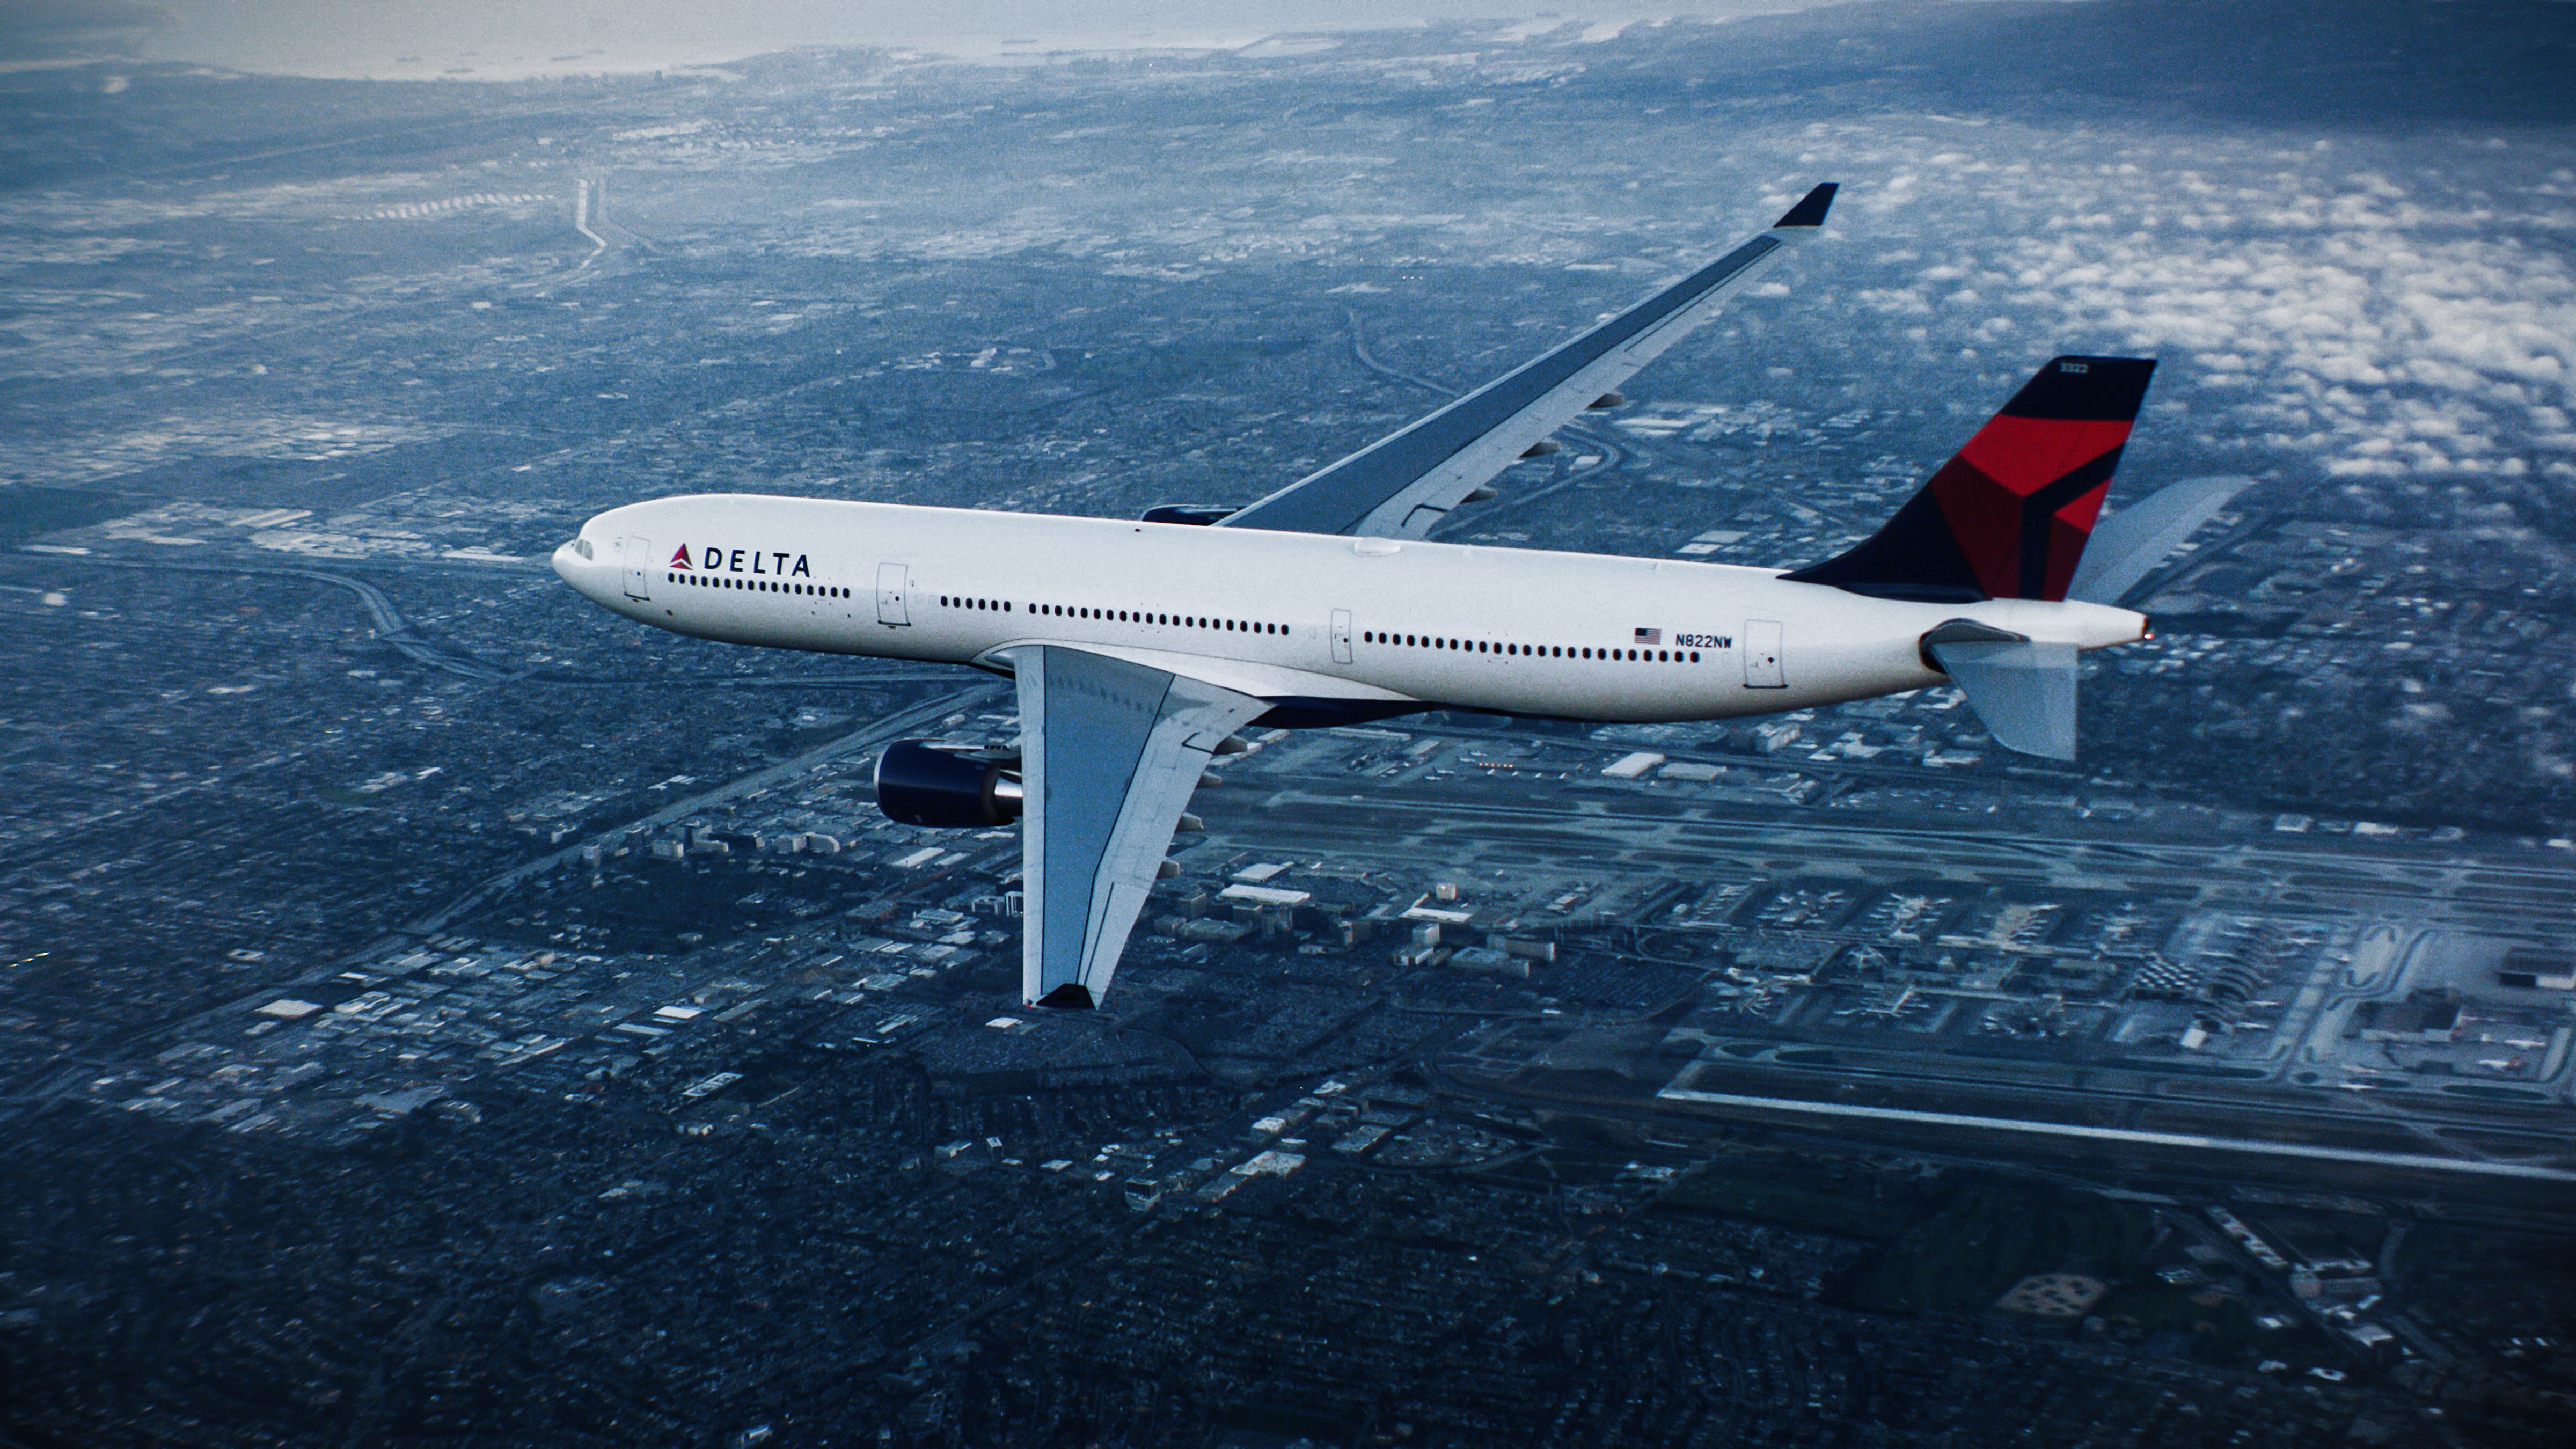 White Airbus A330 aircraft with Delta Air Lines livery flies over a city